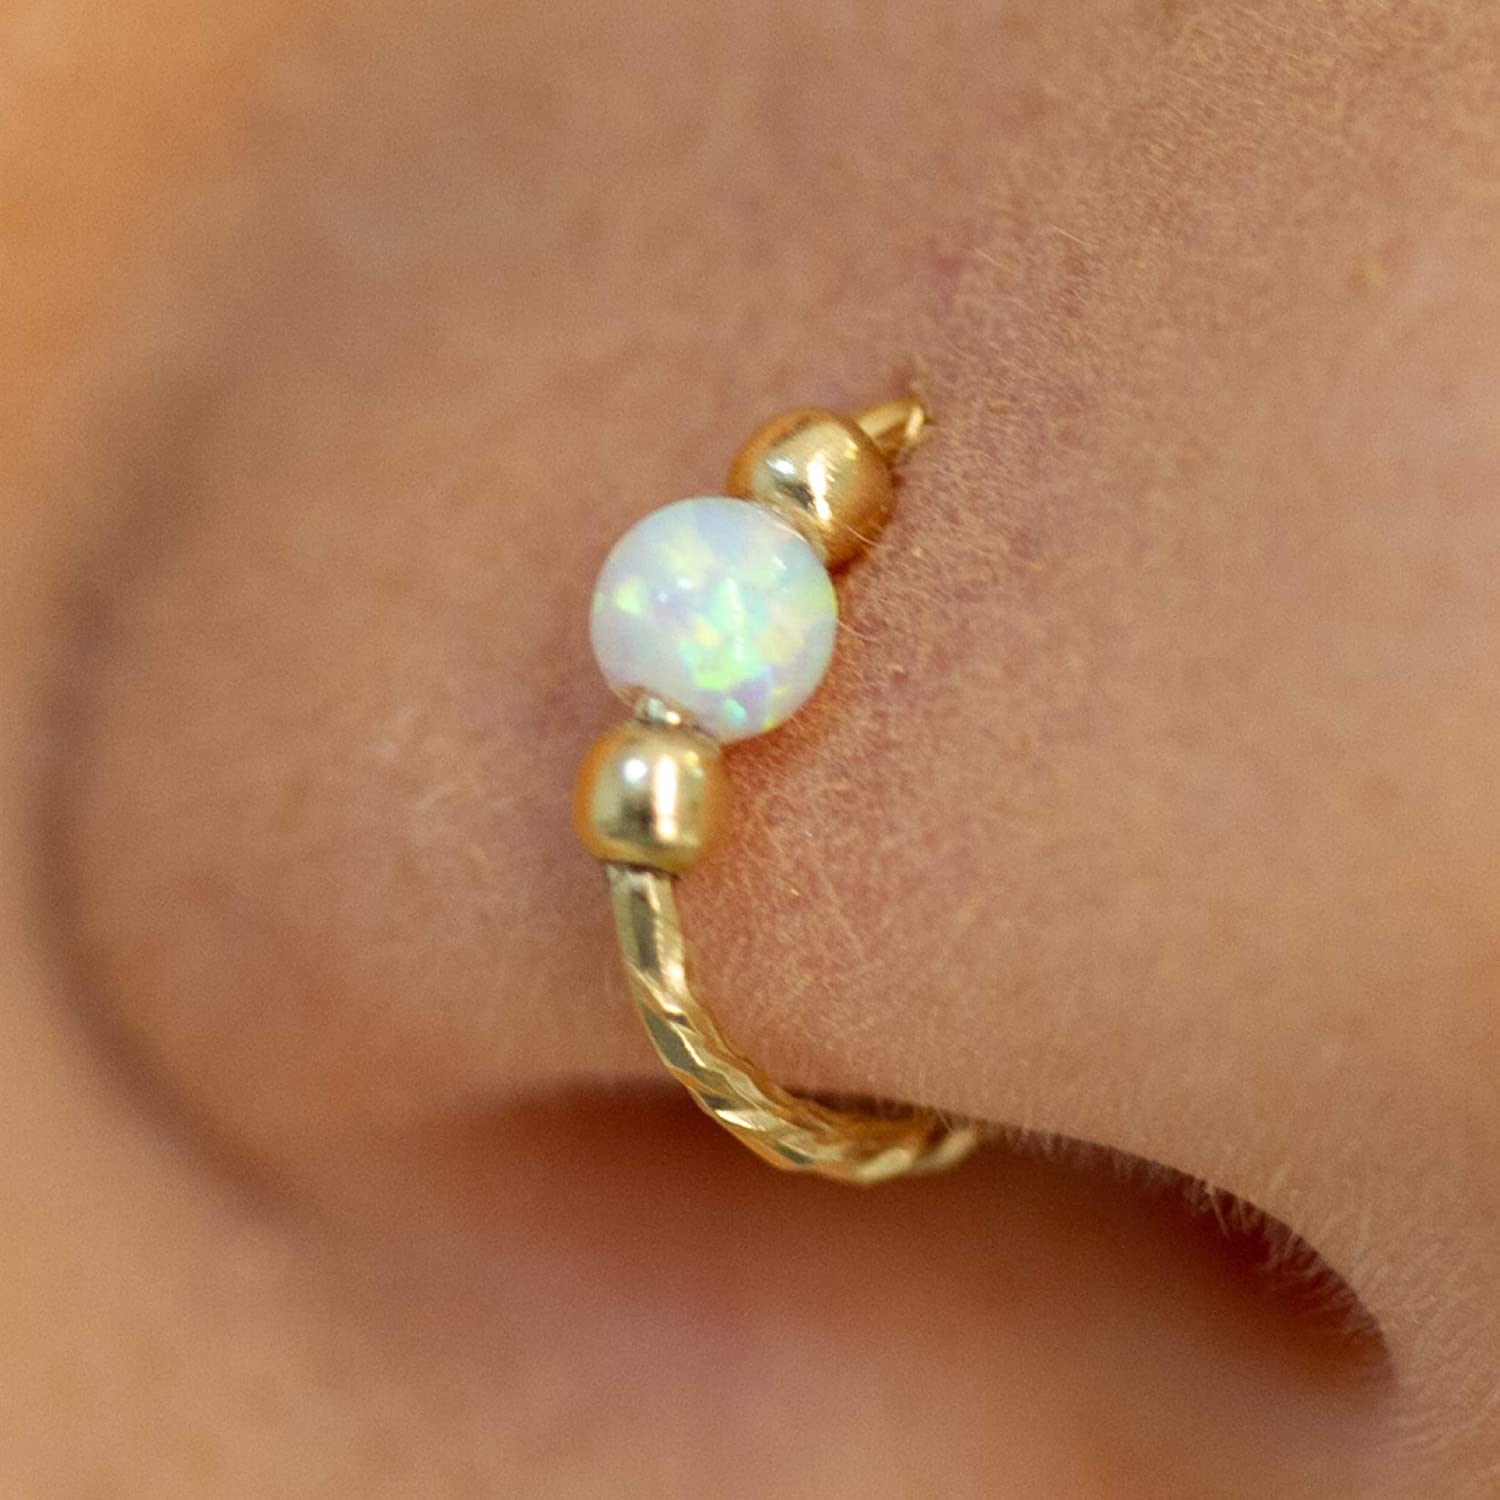 14k Tiny Fake Nose Rings No Piercing Needed Faux Body Jewelry 14k Gold Filled Jewelry